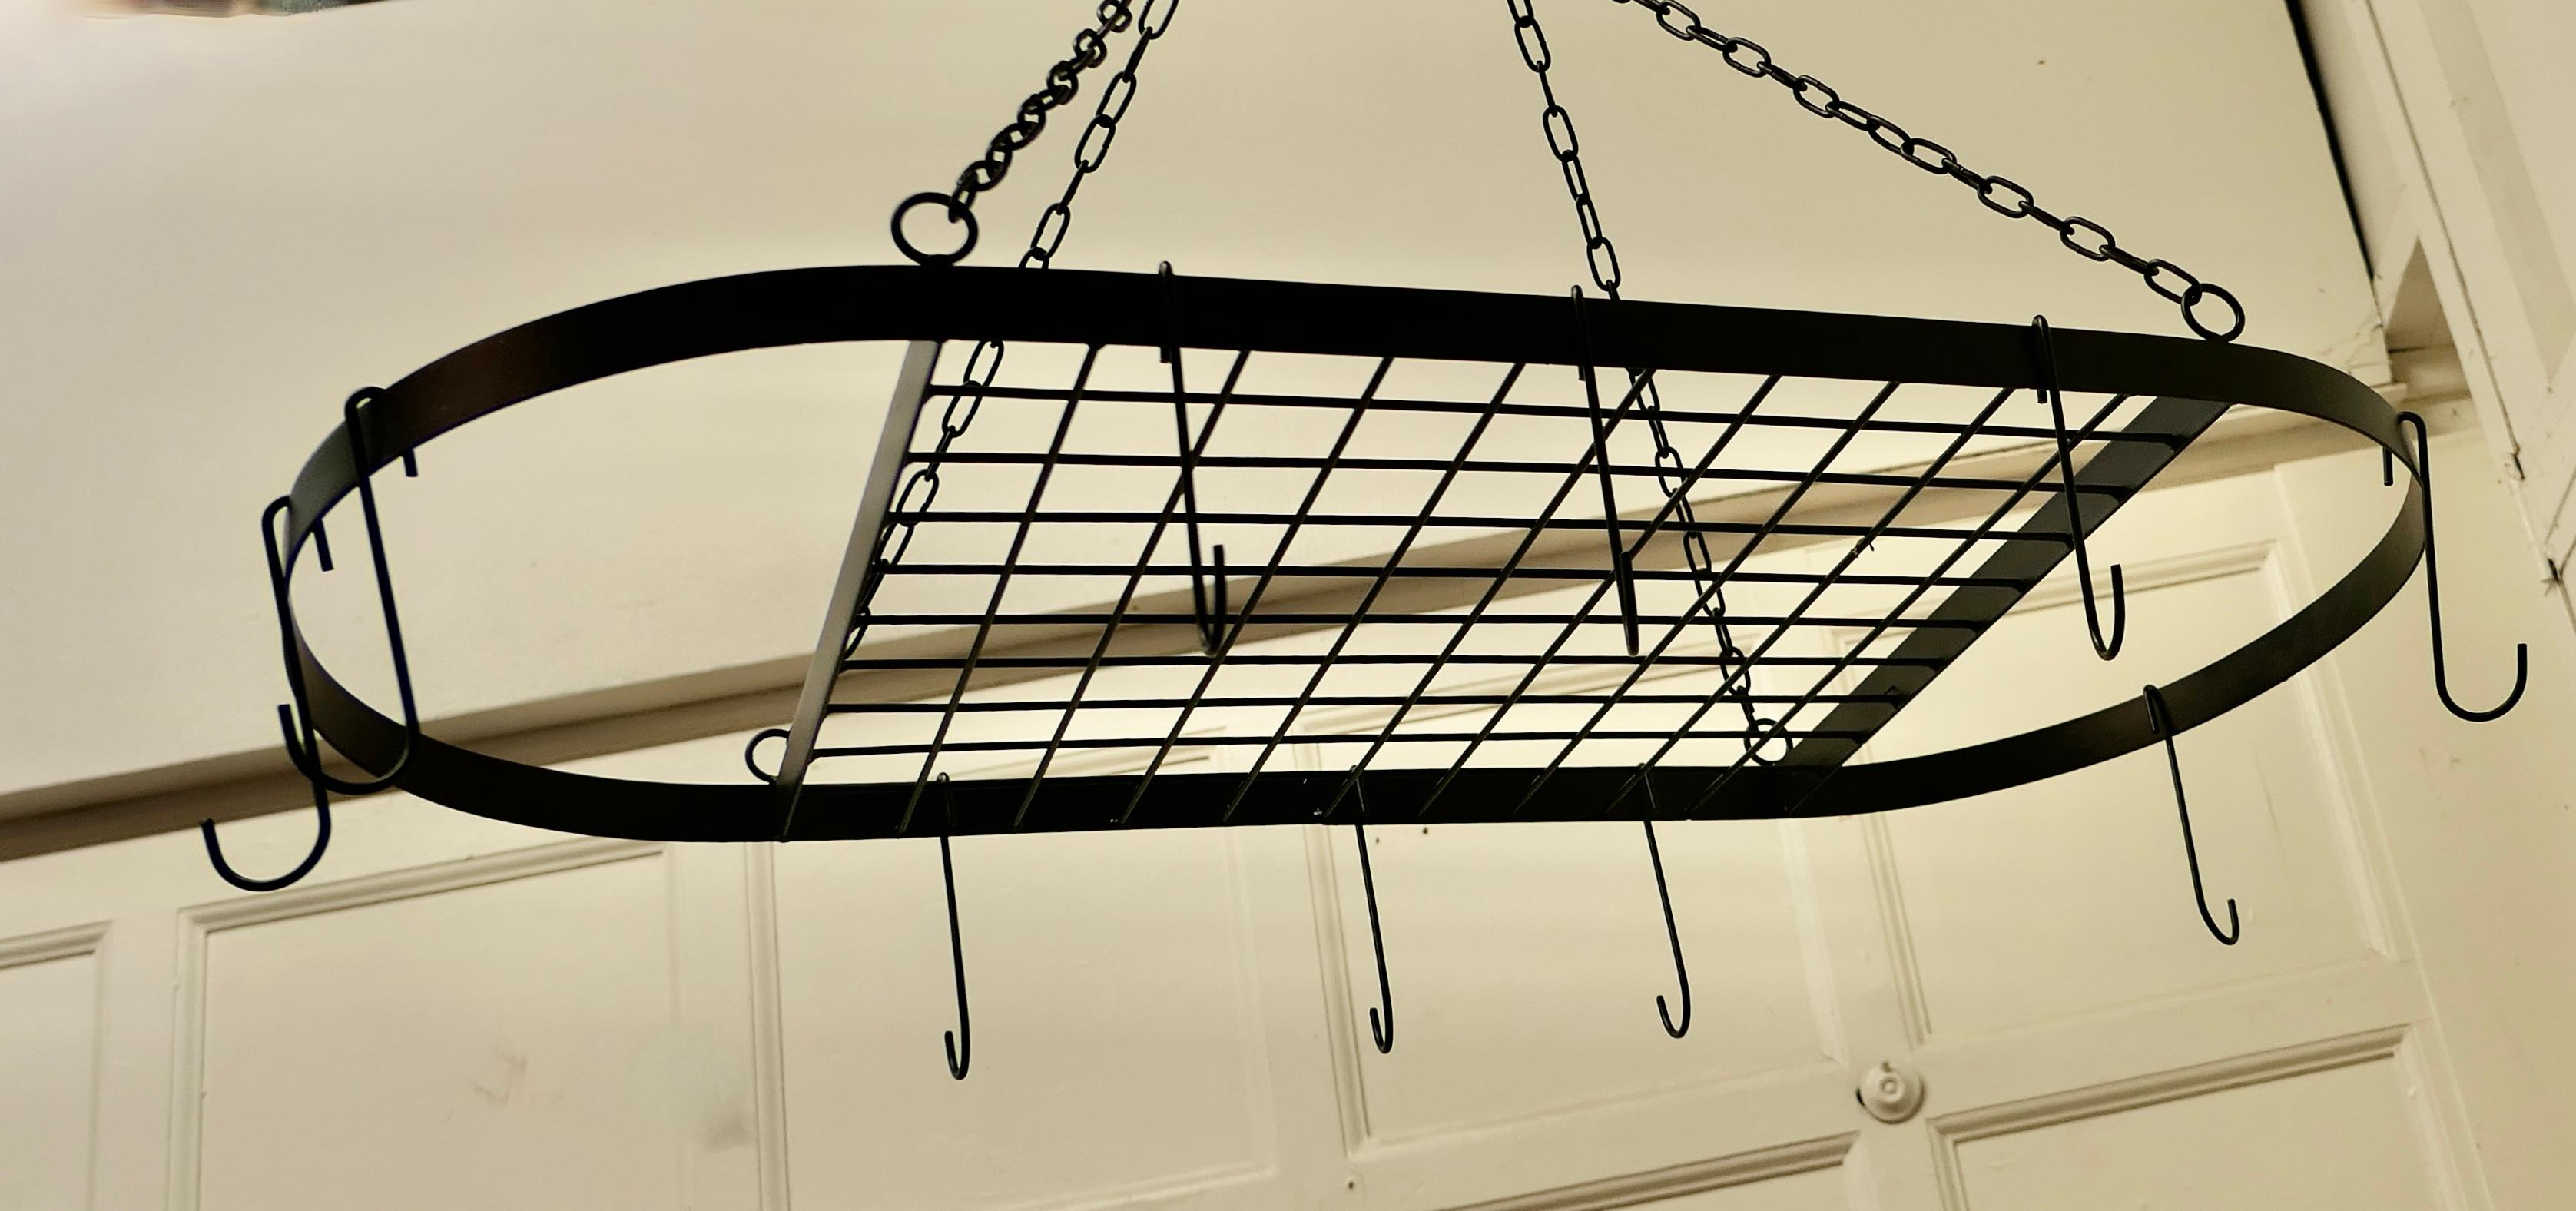 Large Oval Iron Game Hanger, Kitchen Utensil or Pot Hanger In Good Condition For Sale In Chillerton, Isle of Wight